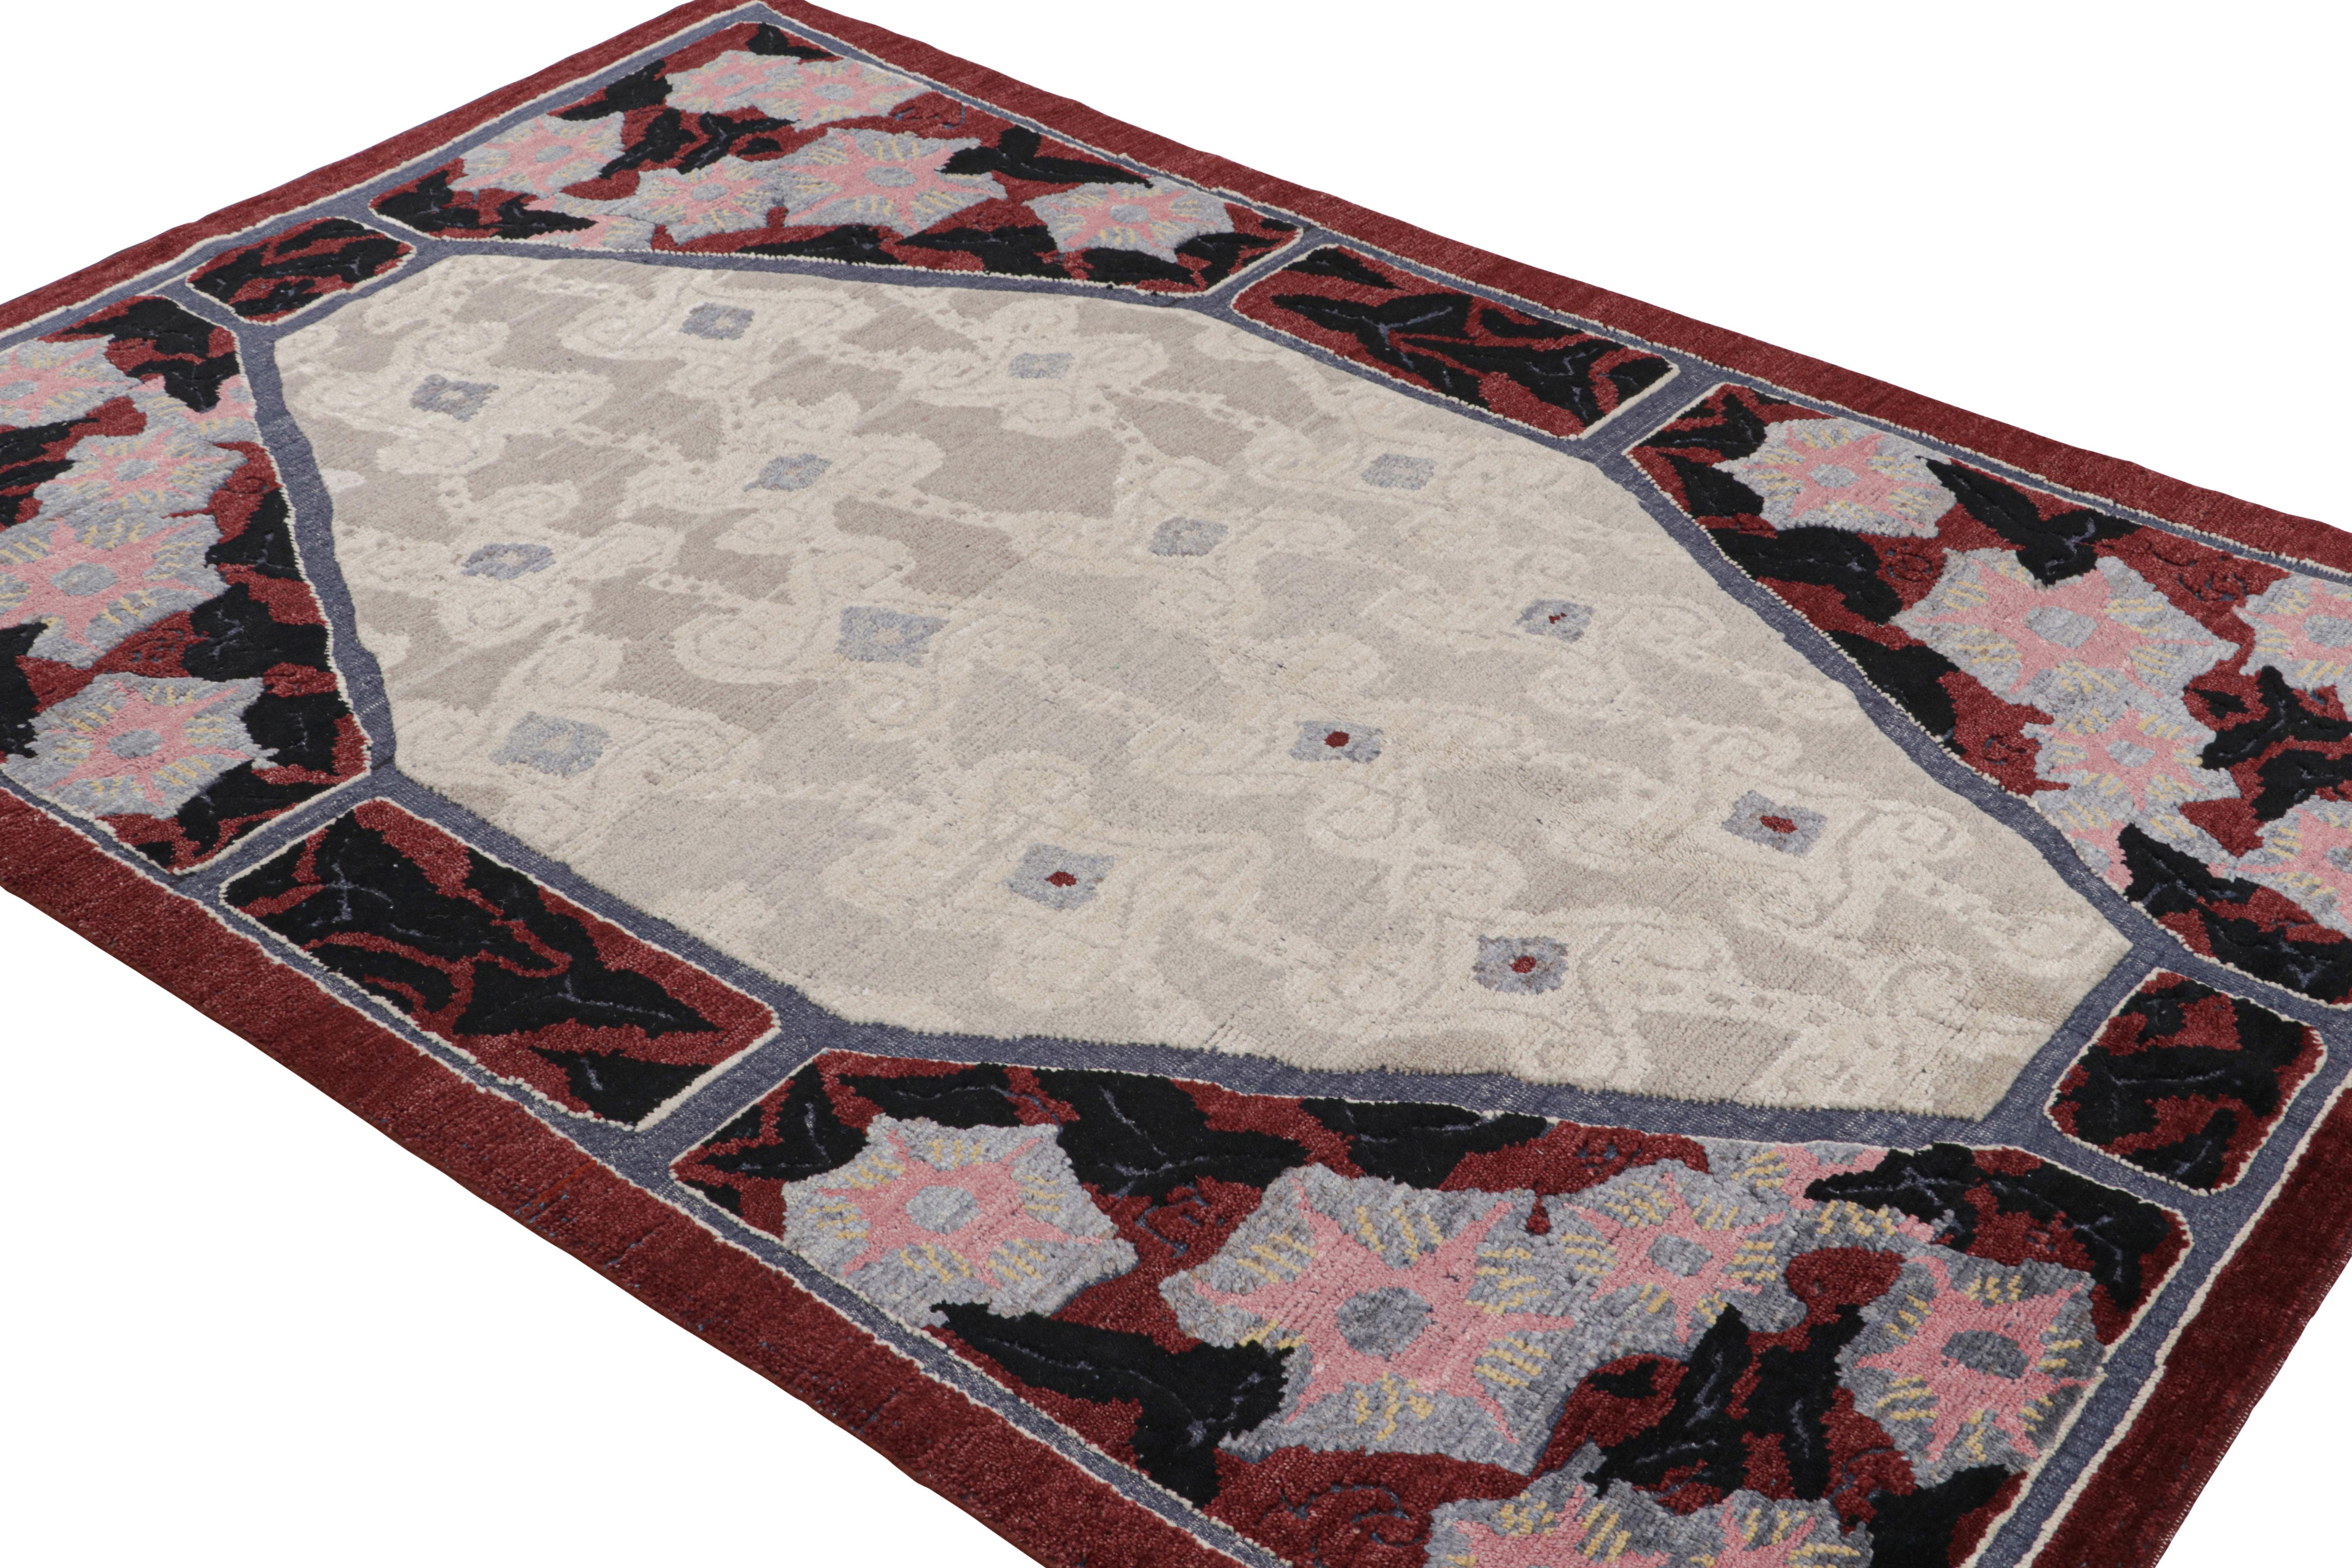 Hand-knotted in wool, this 6x9 French Art Deco rug features an interesting play of red and beige-gray in the all over geometric patterns.
 
On the Design: 

Admirers of the craft will appreciate a subtle refinement in the texture, detail, and